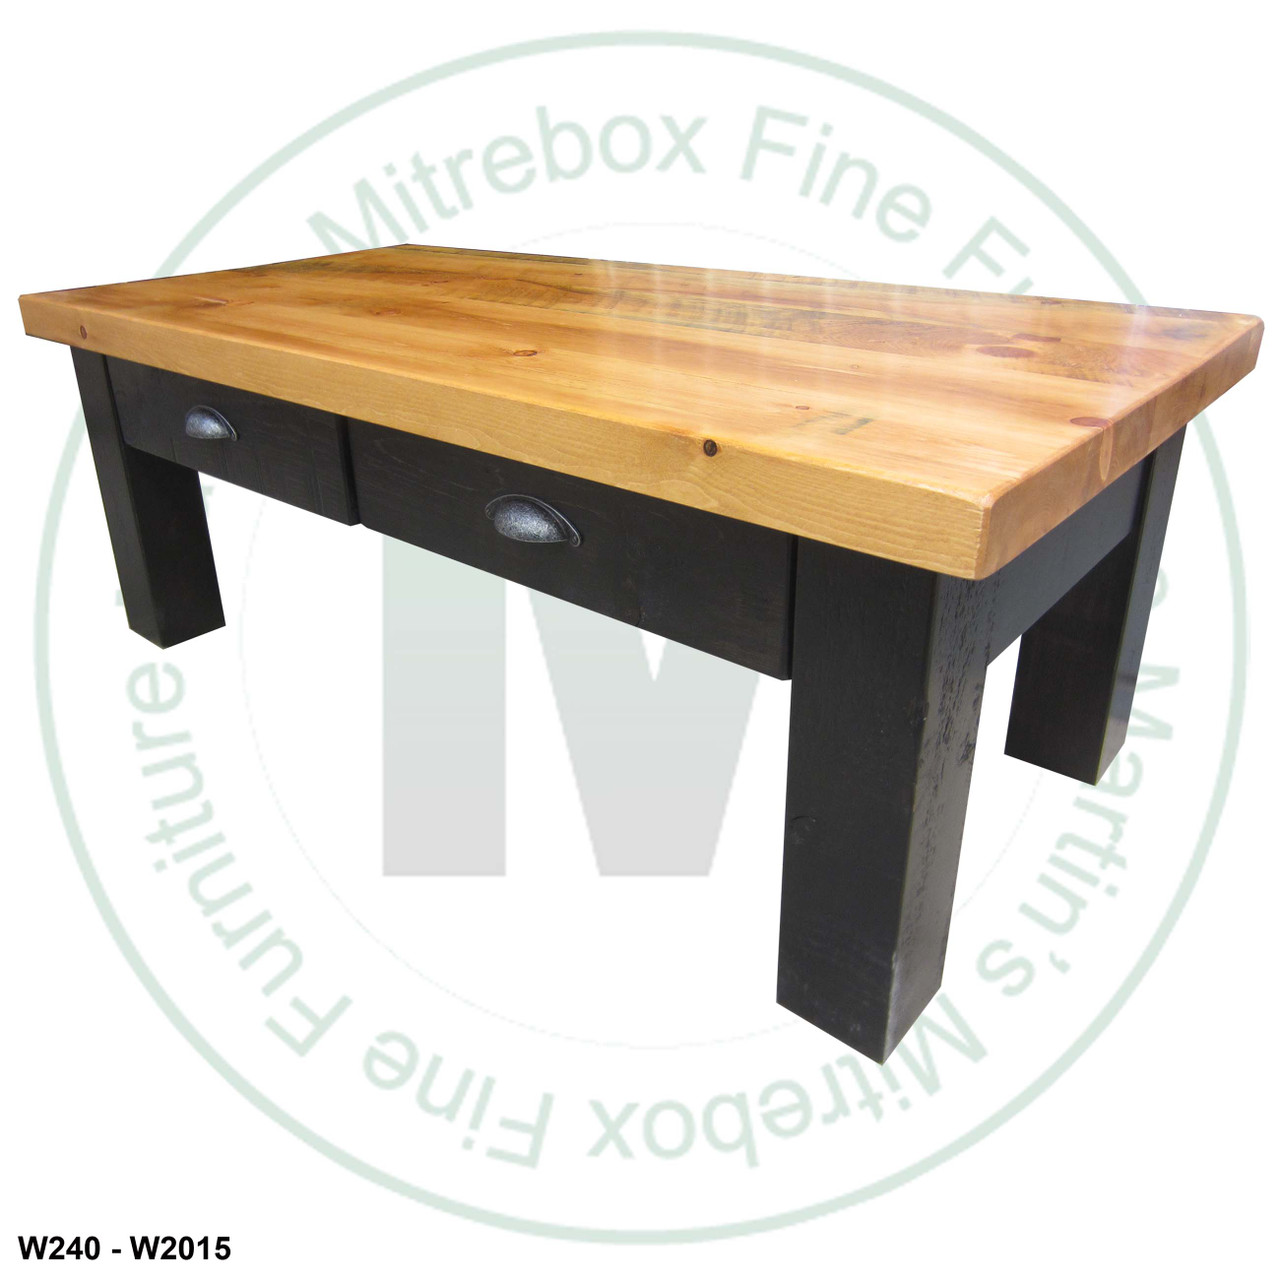 Pine Frontier Coffee Table 24''D x 48''W x 18''H With 2 Drawers.